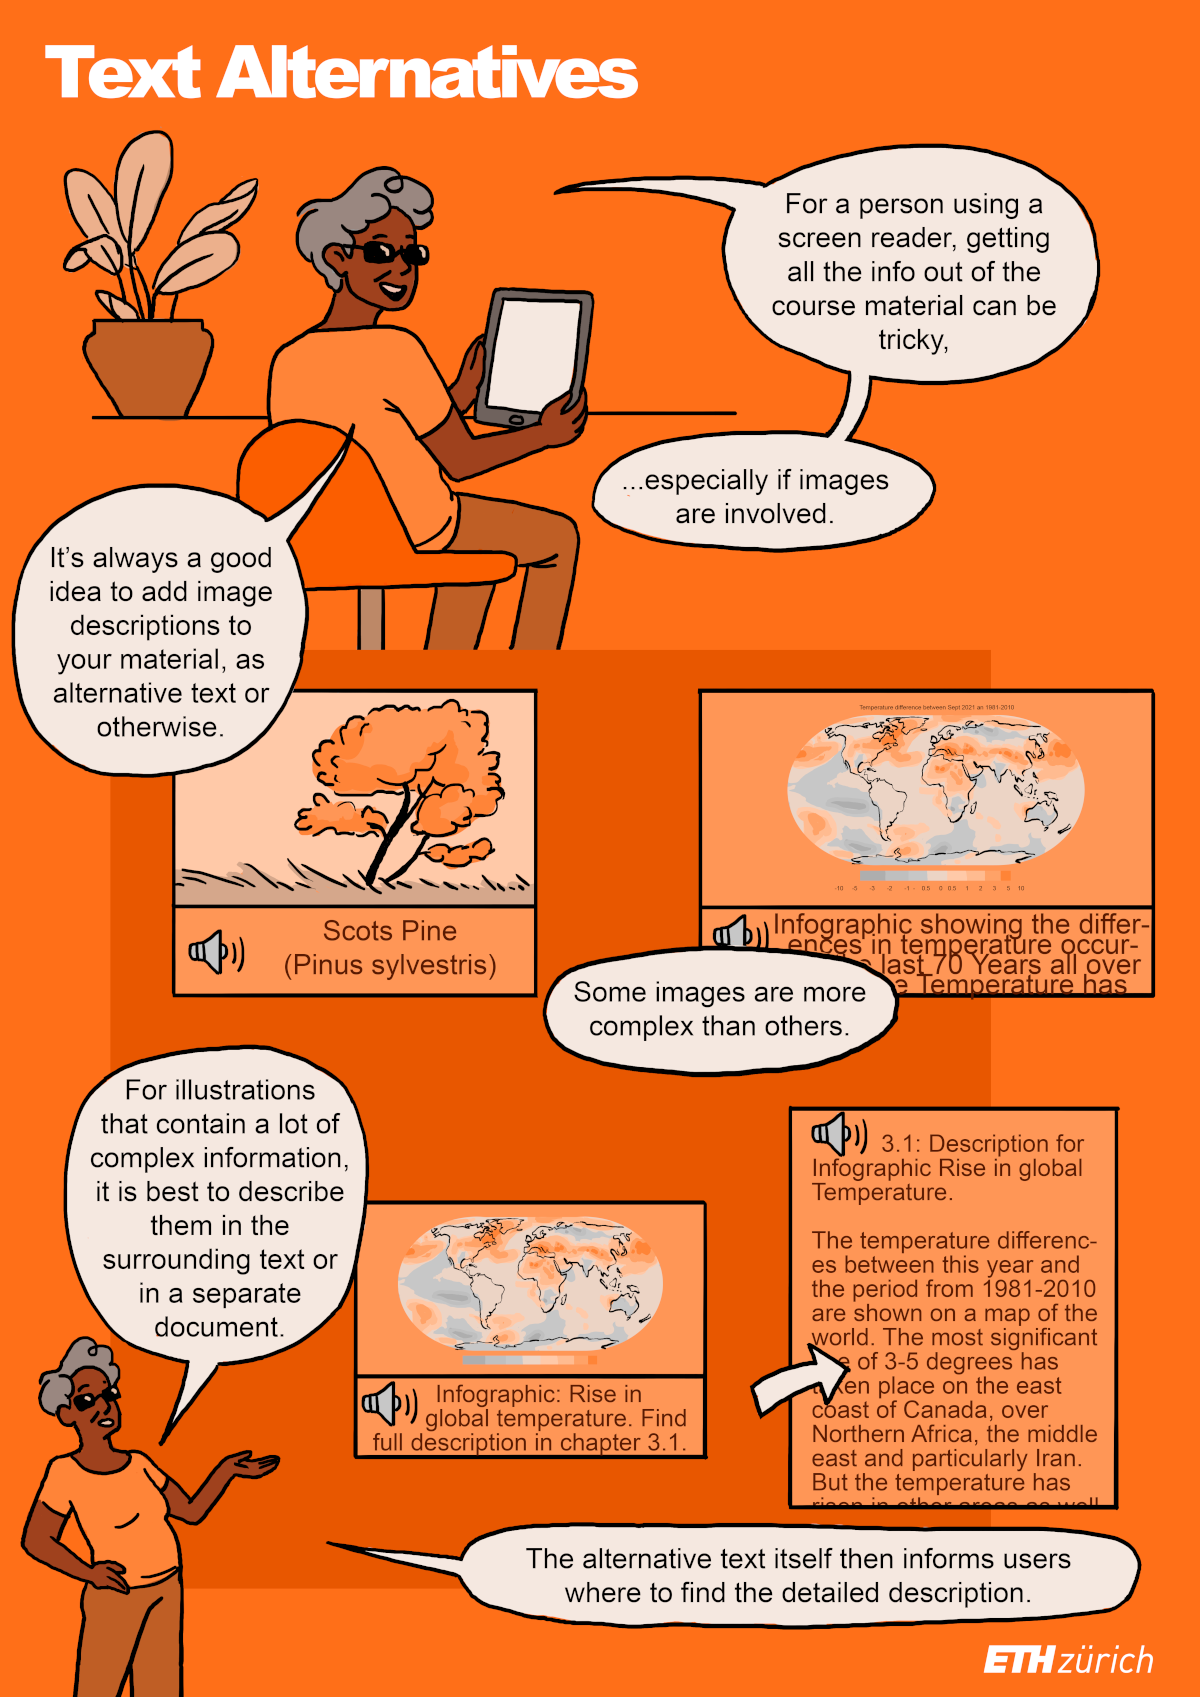 Comic illustration on text alternatives in digital learning content (refer to image caption)